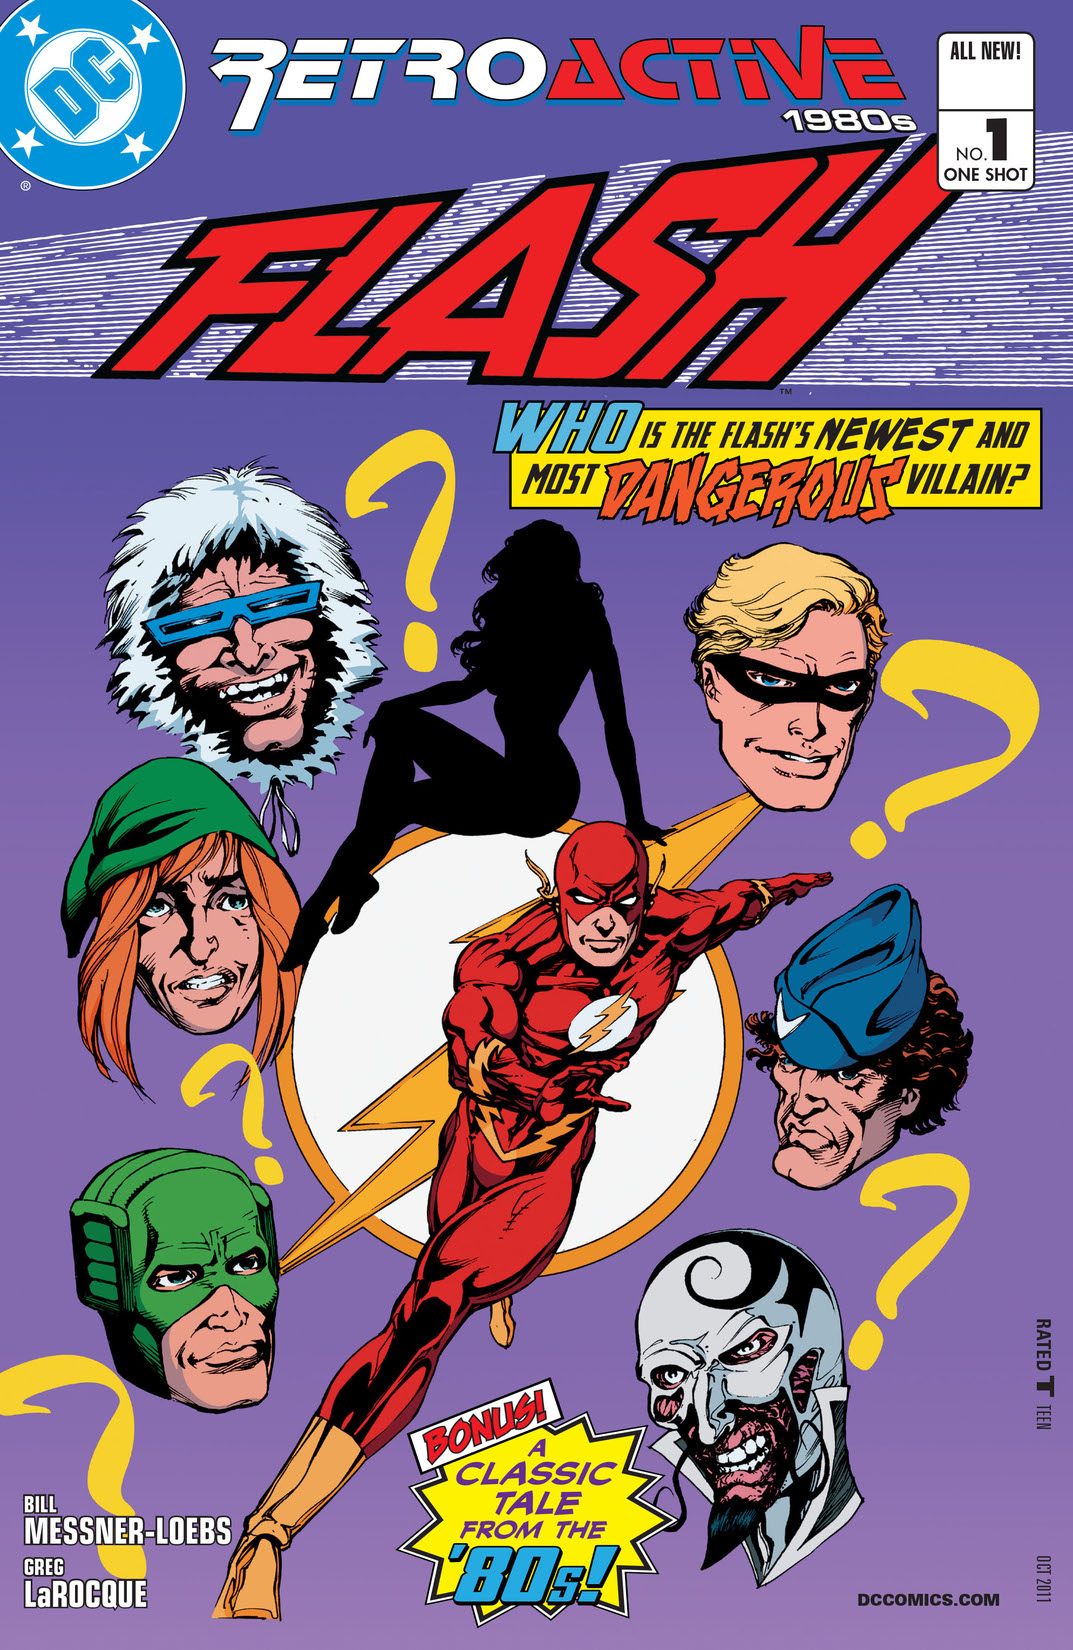 DC Retroactive: Flash - The '80s #1 preview images